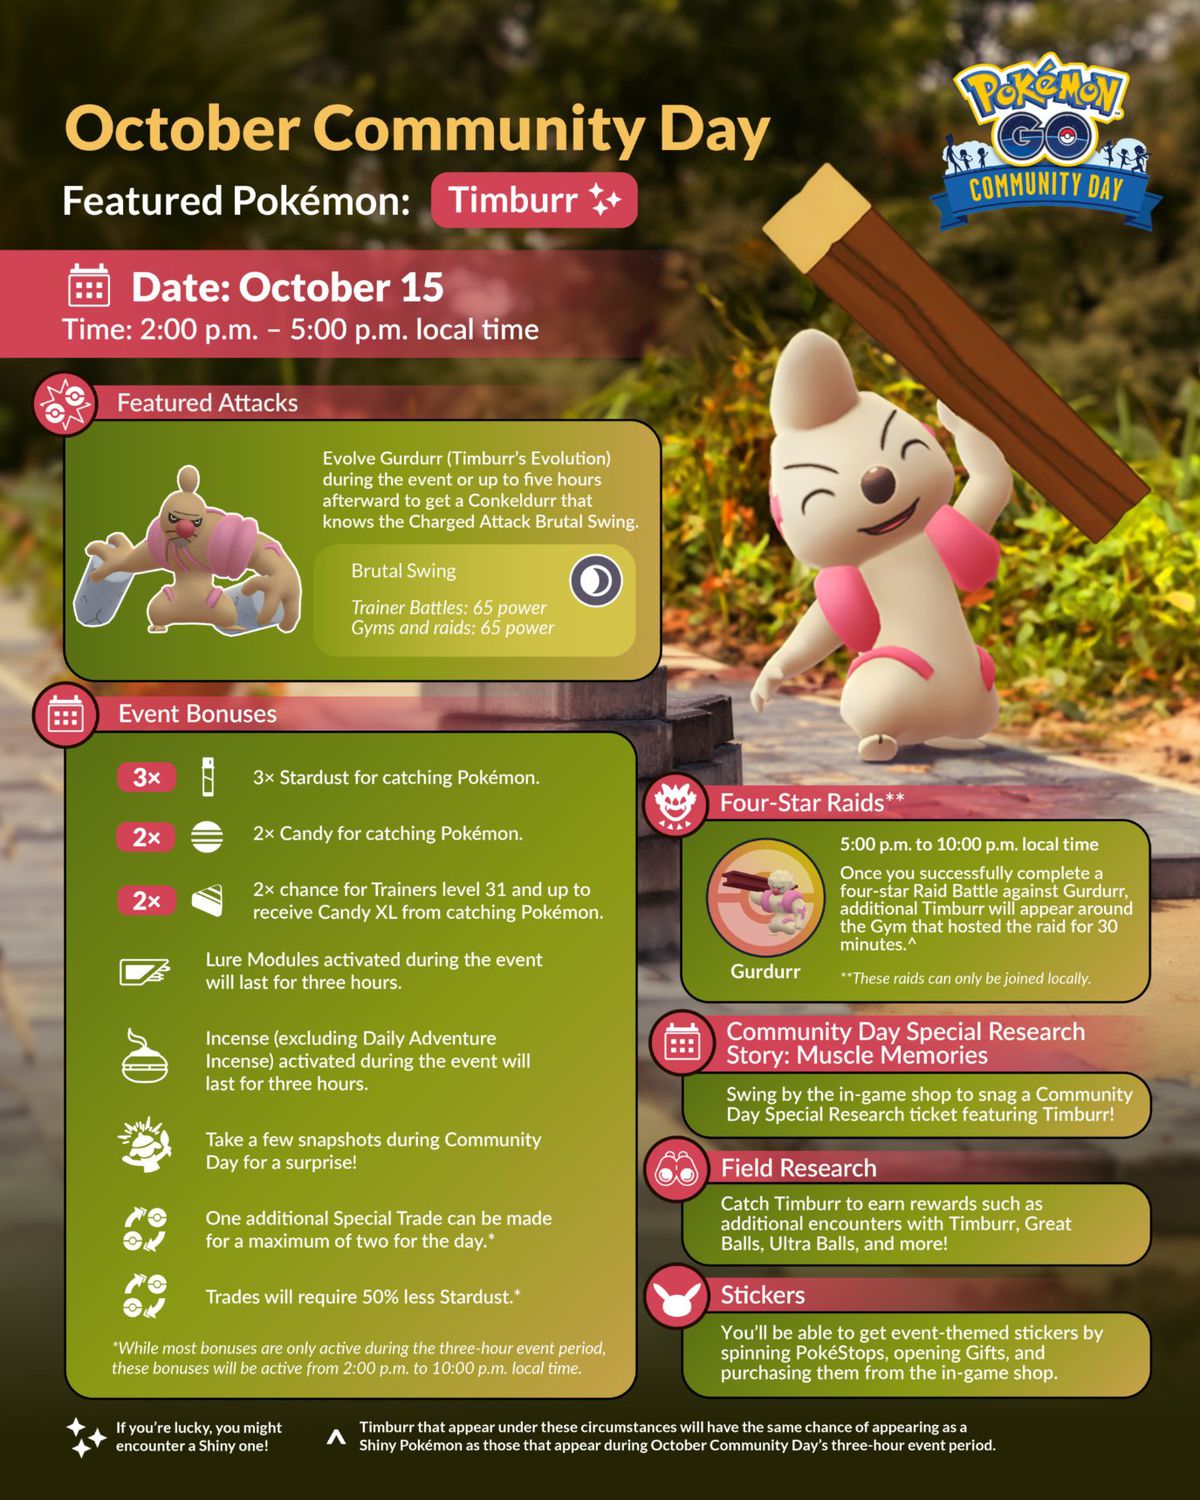 October Community Day infographic showcasing bonuses and features for Timburr in Pokémon Go